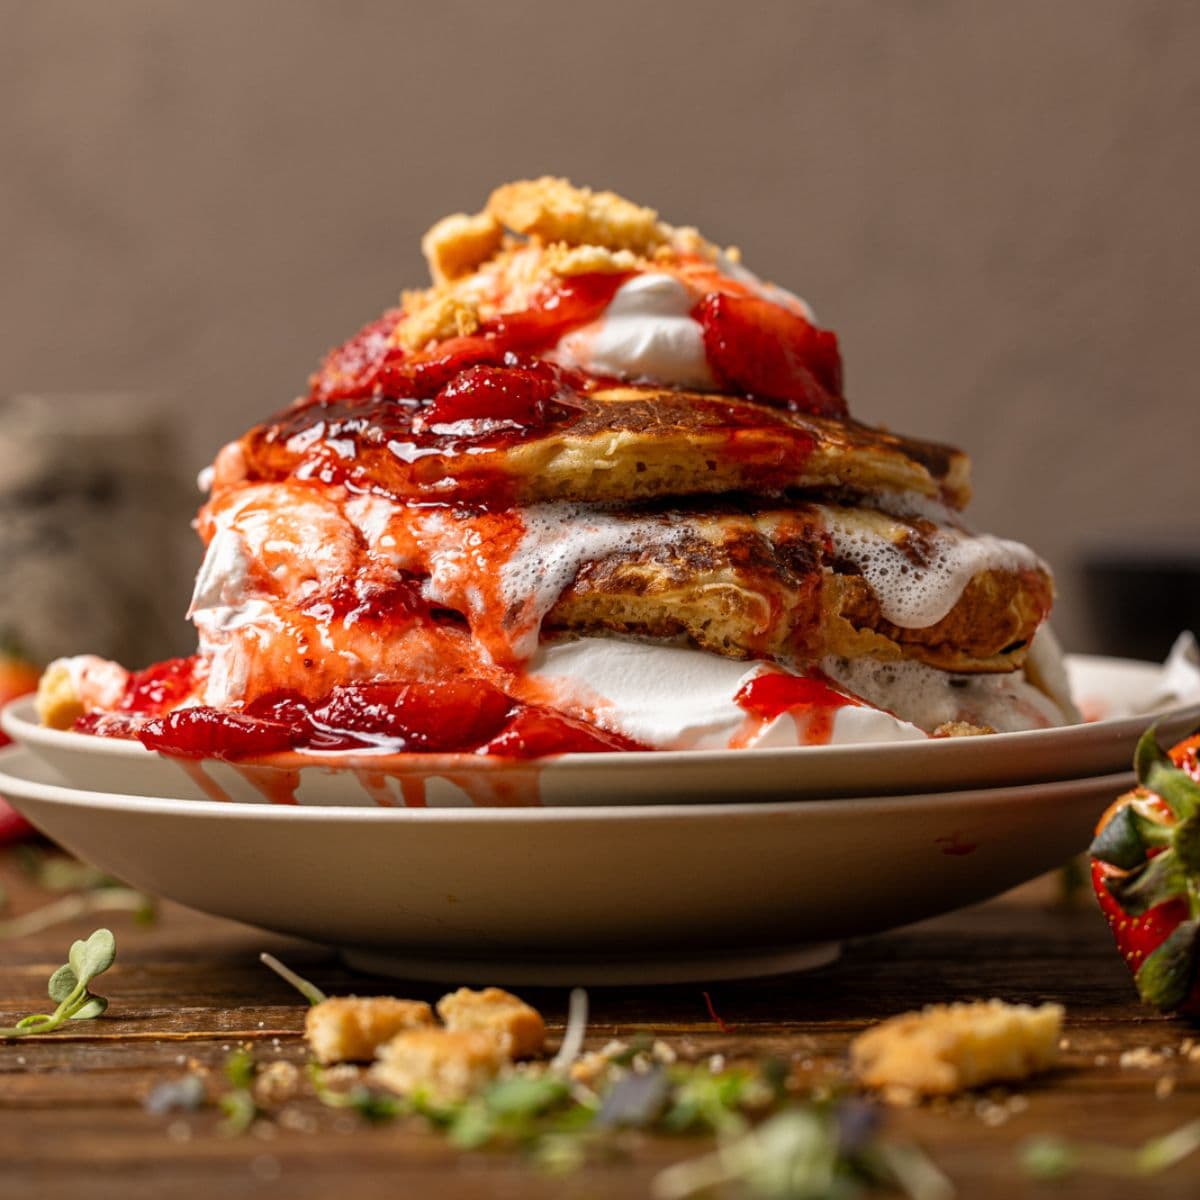 Stacks of pancakes with whipped cream, strawberries, and cookies.